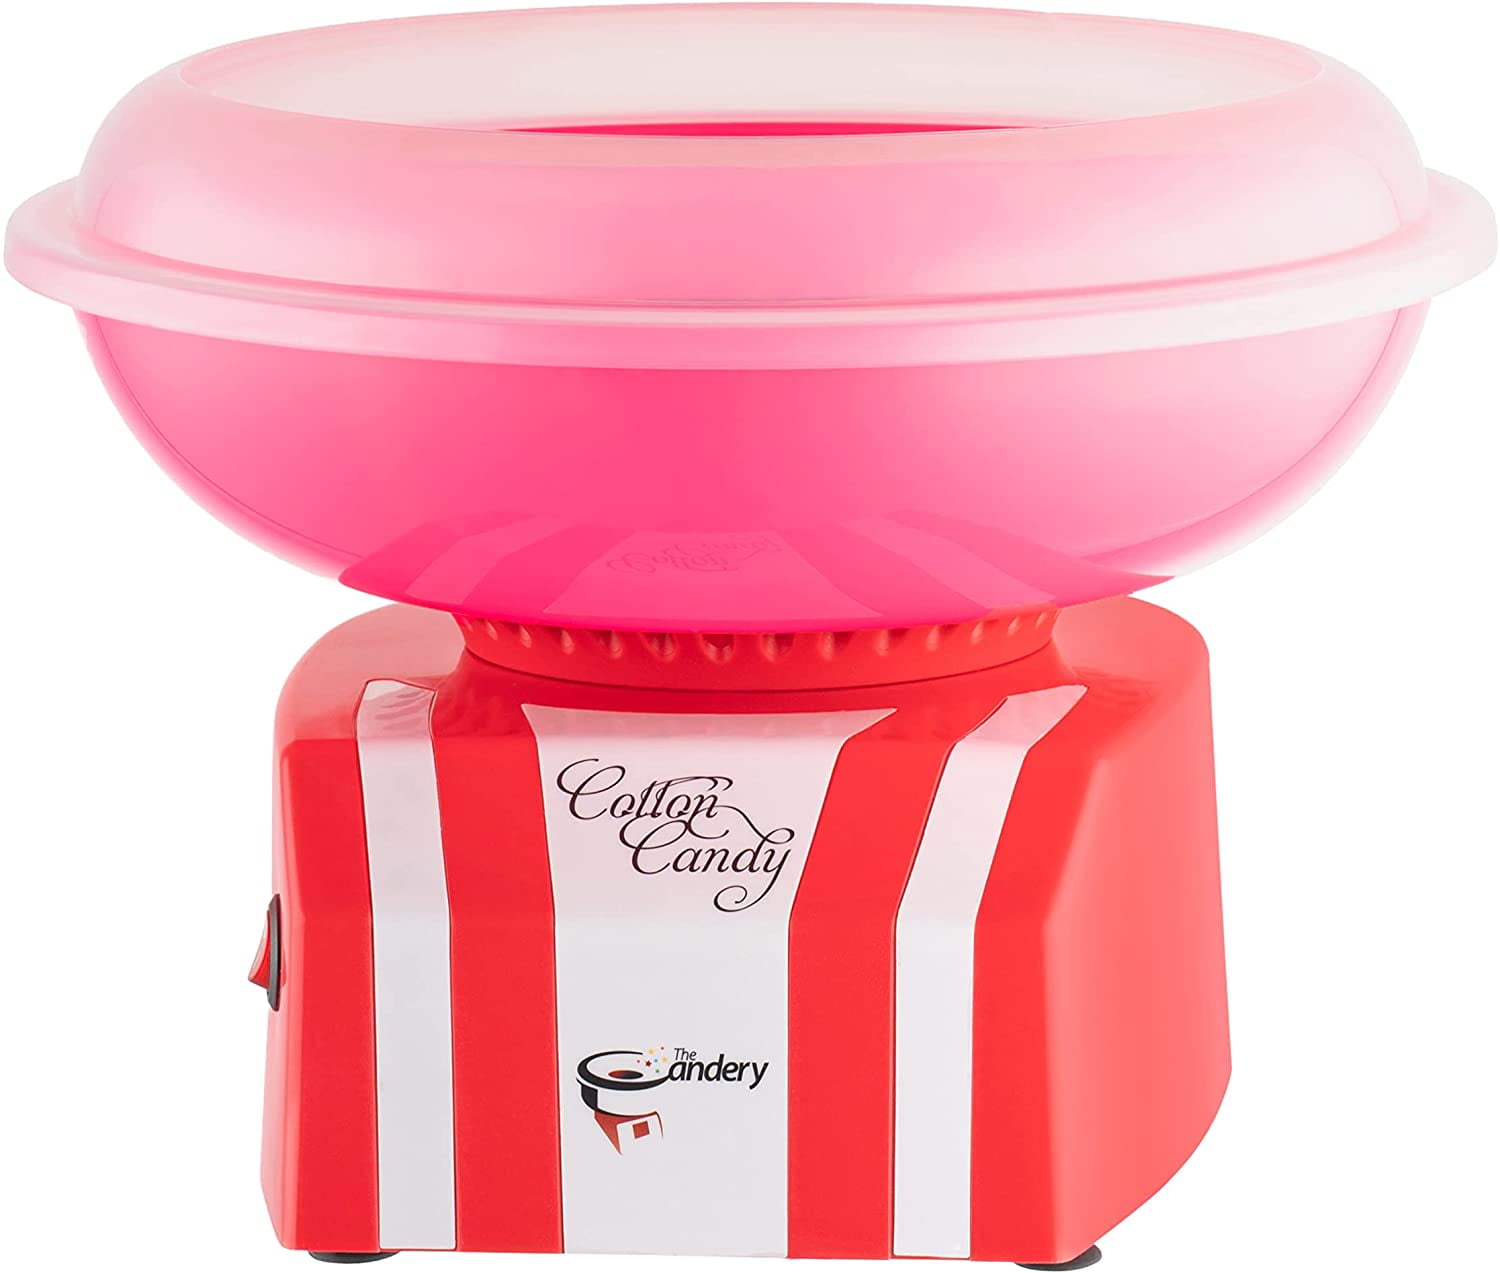 rijk Citaat versterking The Candery Cotton Candy Machine - Bright, Colorful Style- Makes Hard Candy,  Sugar Free Candy, Sugar Floss, Homemade Sweets for Birthday Parties -  Includes 10 Candy Cones & Scooper - Walmart.com